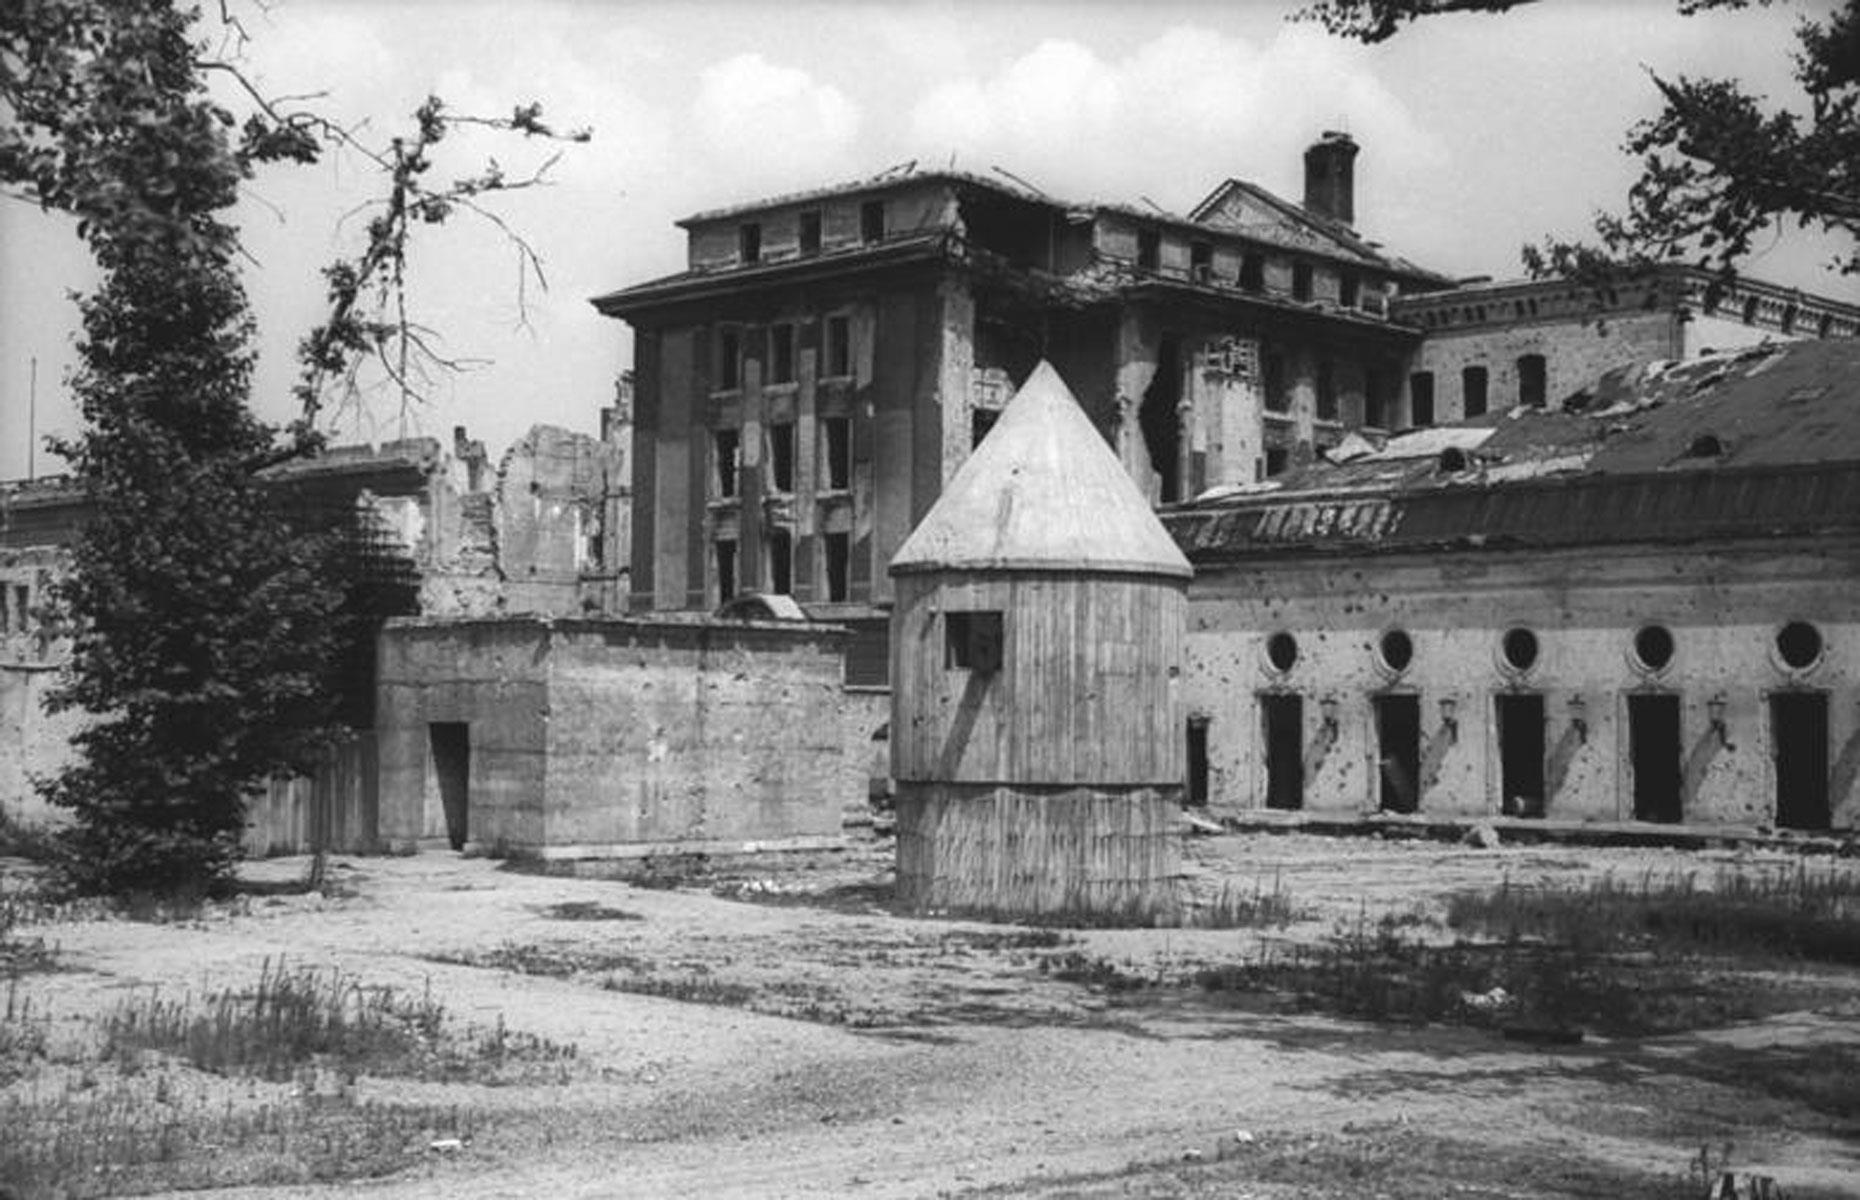 <p>Back in Berlin, Hitler retreated to his bunker near the Reich Chancellery on 16 January 1945, as the Allied forces were advancing on the capital and the German military was on its last legs. Completed in 1944, the Führerbunker was built 28 feet below ground and enveloped in 13-foot-thick concrete to withstand the most destructive conventional bombs.</p>